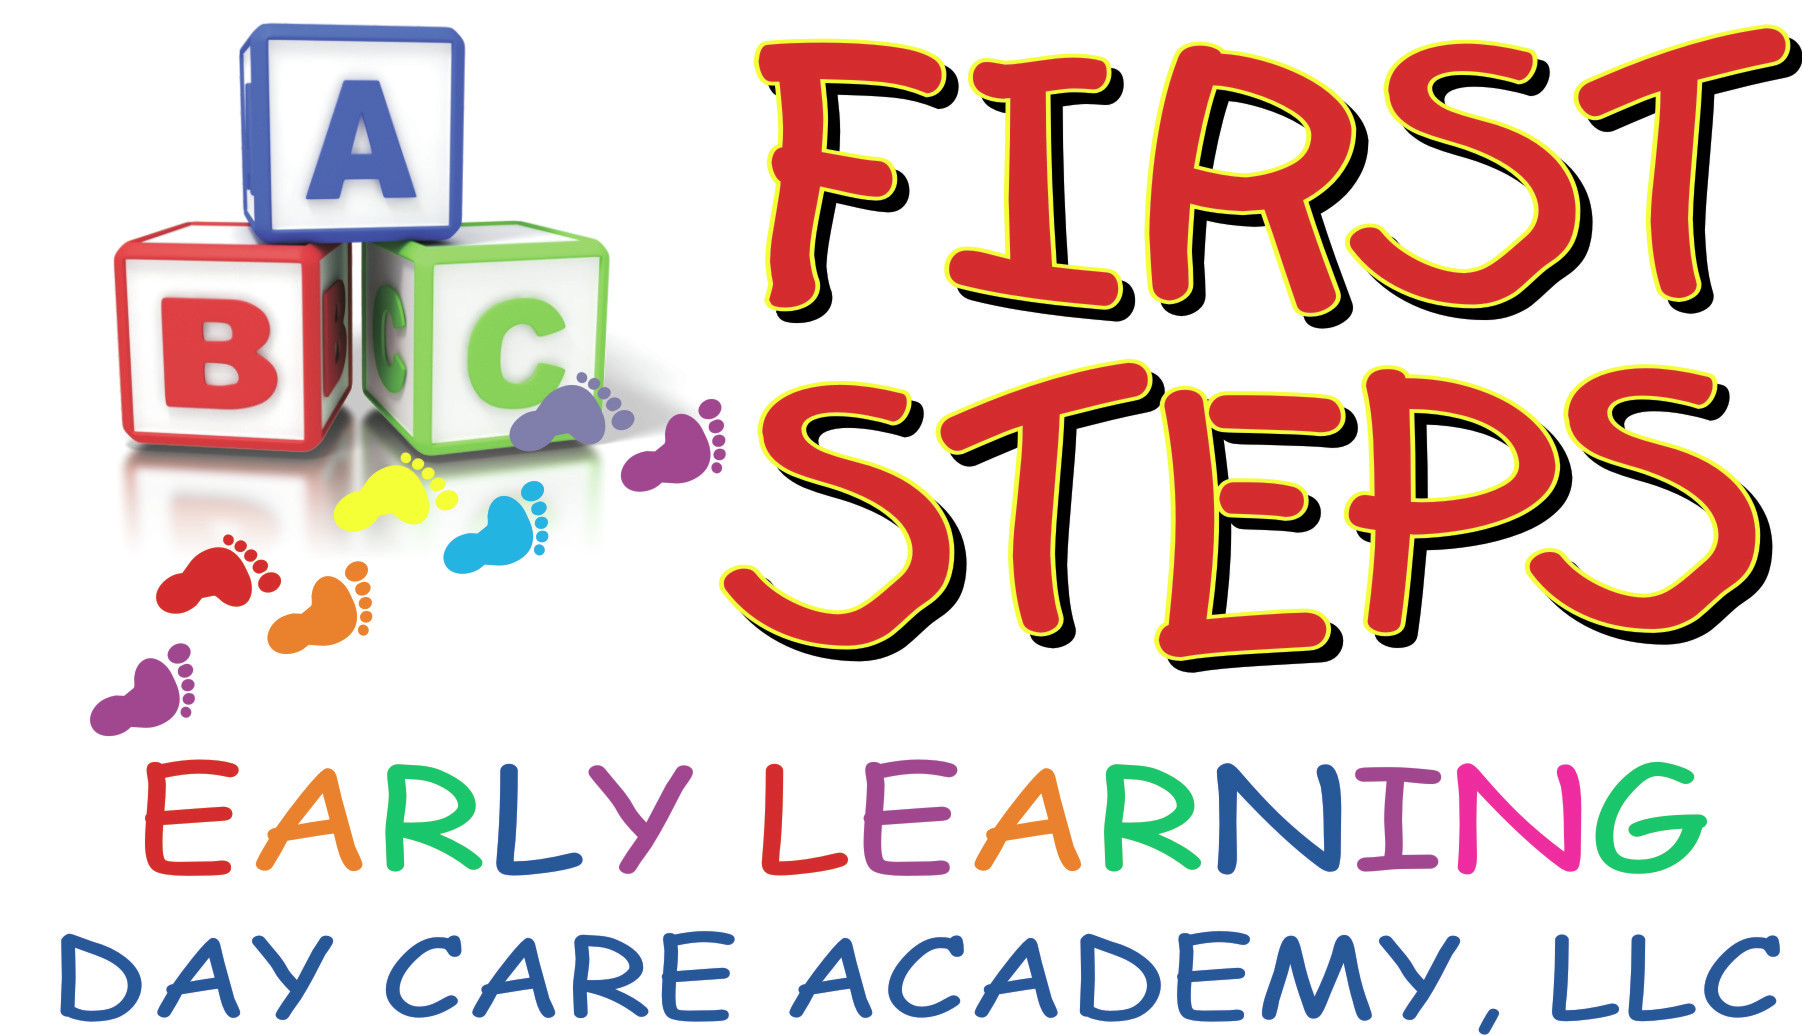 1 first step. Картинками first steps. ВР first steps. Day 2 Day Care баннер. My first steps in English.